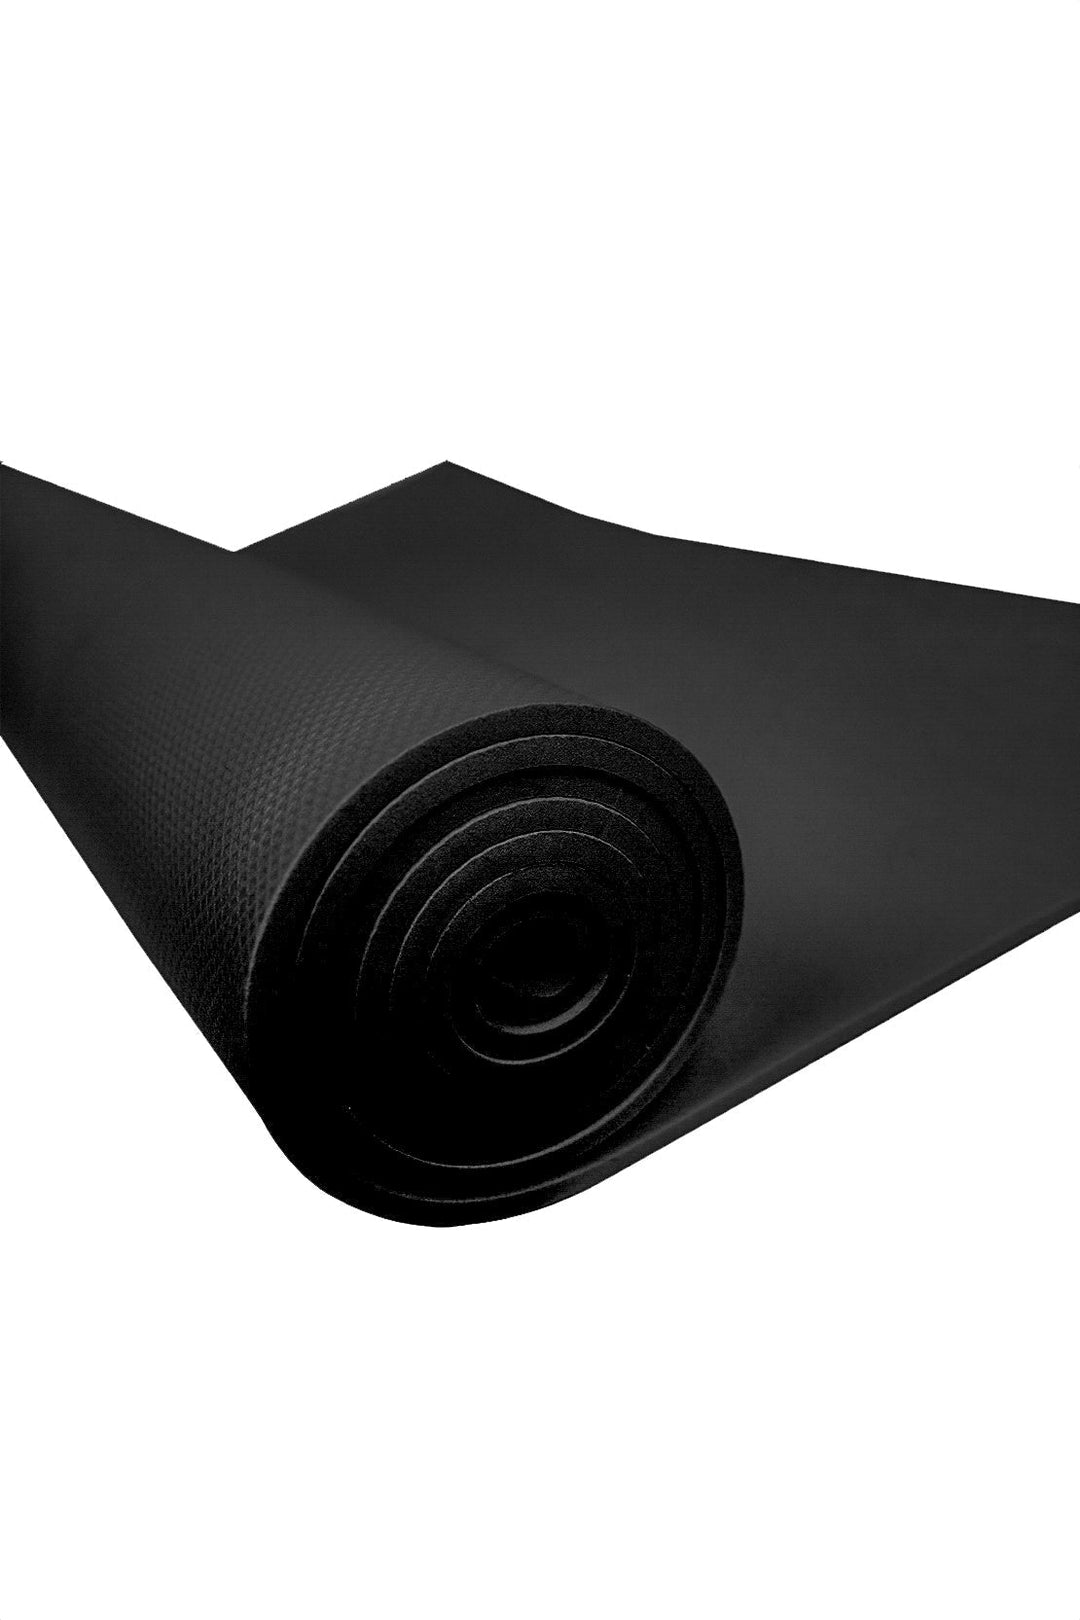 10 mm Thick Yoga Mat for Indoor and Outdoor Use, lack - V Surfaces